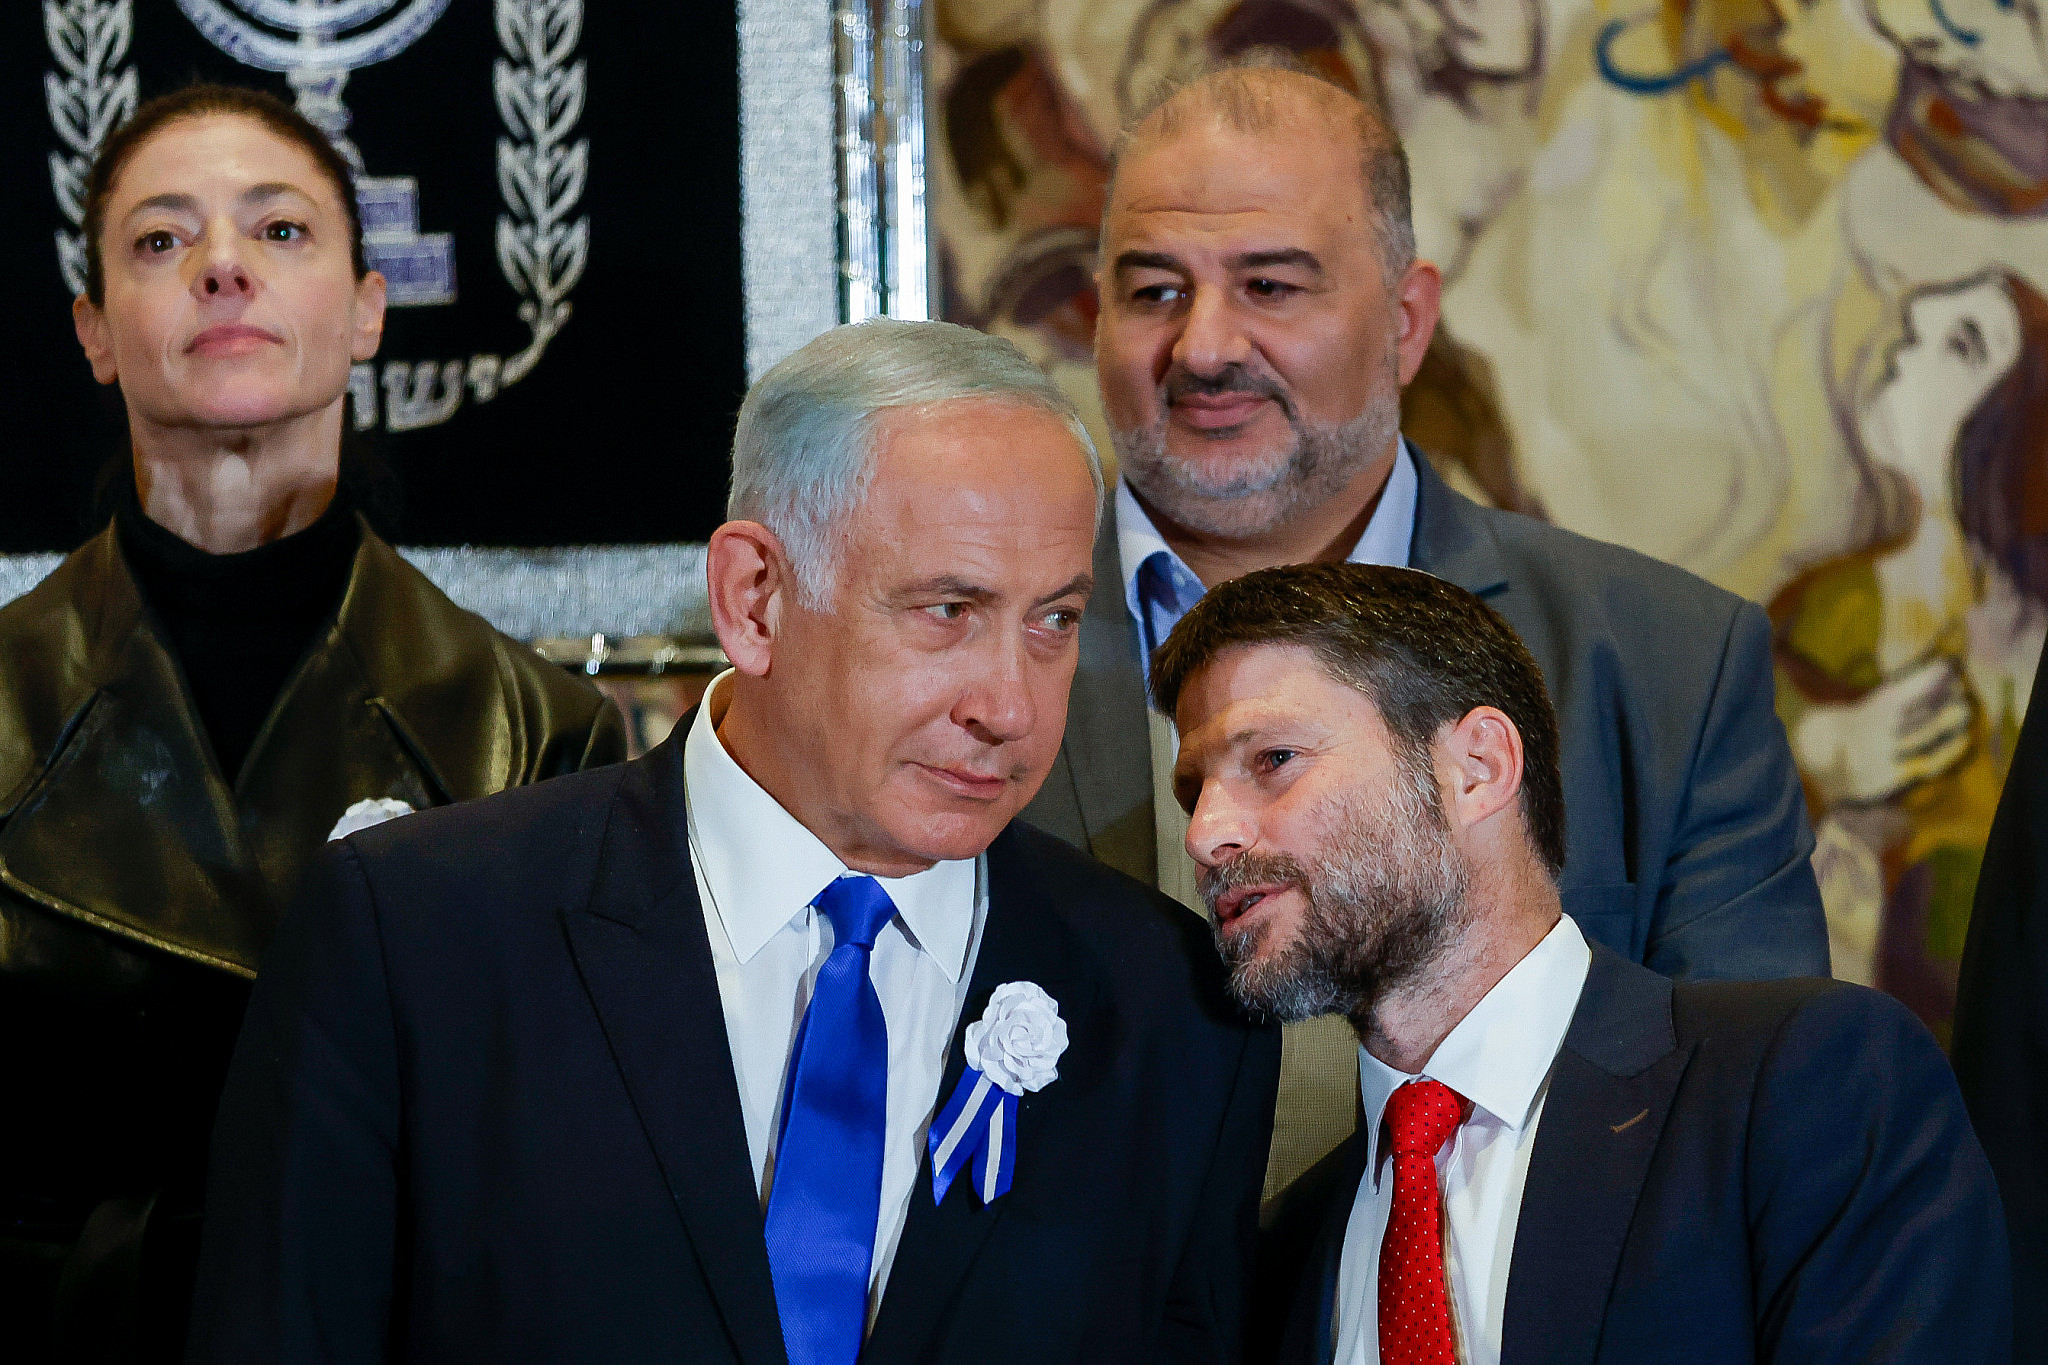 Likud leader MK Benjamin Netanyahu speaks with Religious Zionist party head MK Bezalel Smotrich at a swearing-in ceremony of the 25th Knesset, at the Israeli parliament in Jerusalem, November 15, 2022. (Olivier Fitoussi/Flash90)